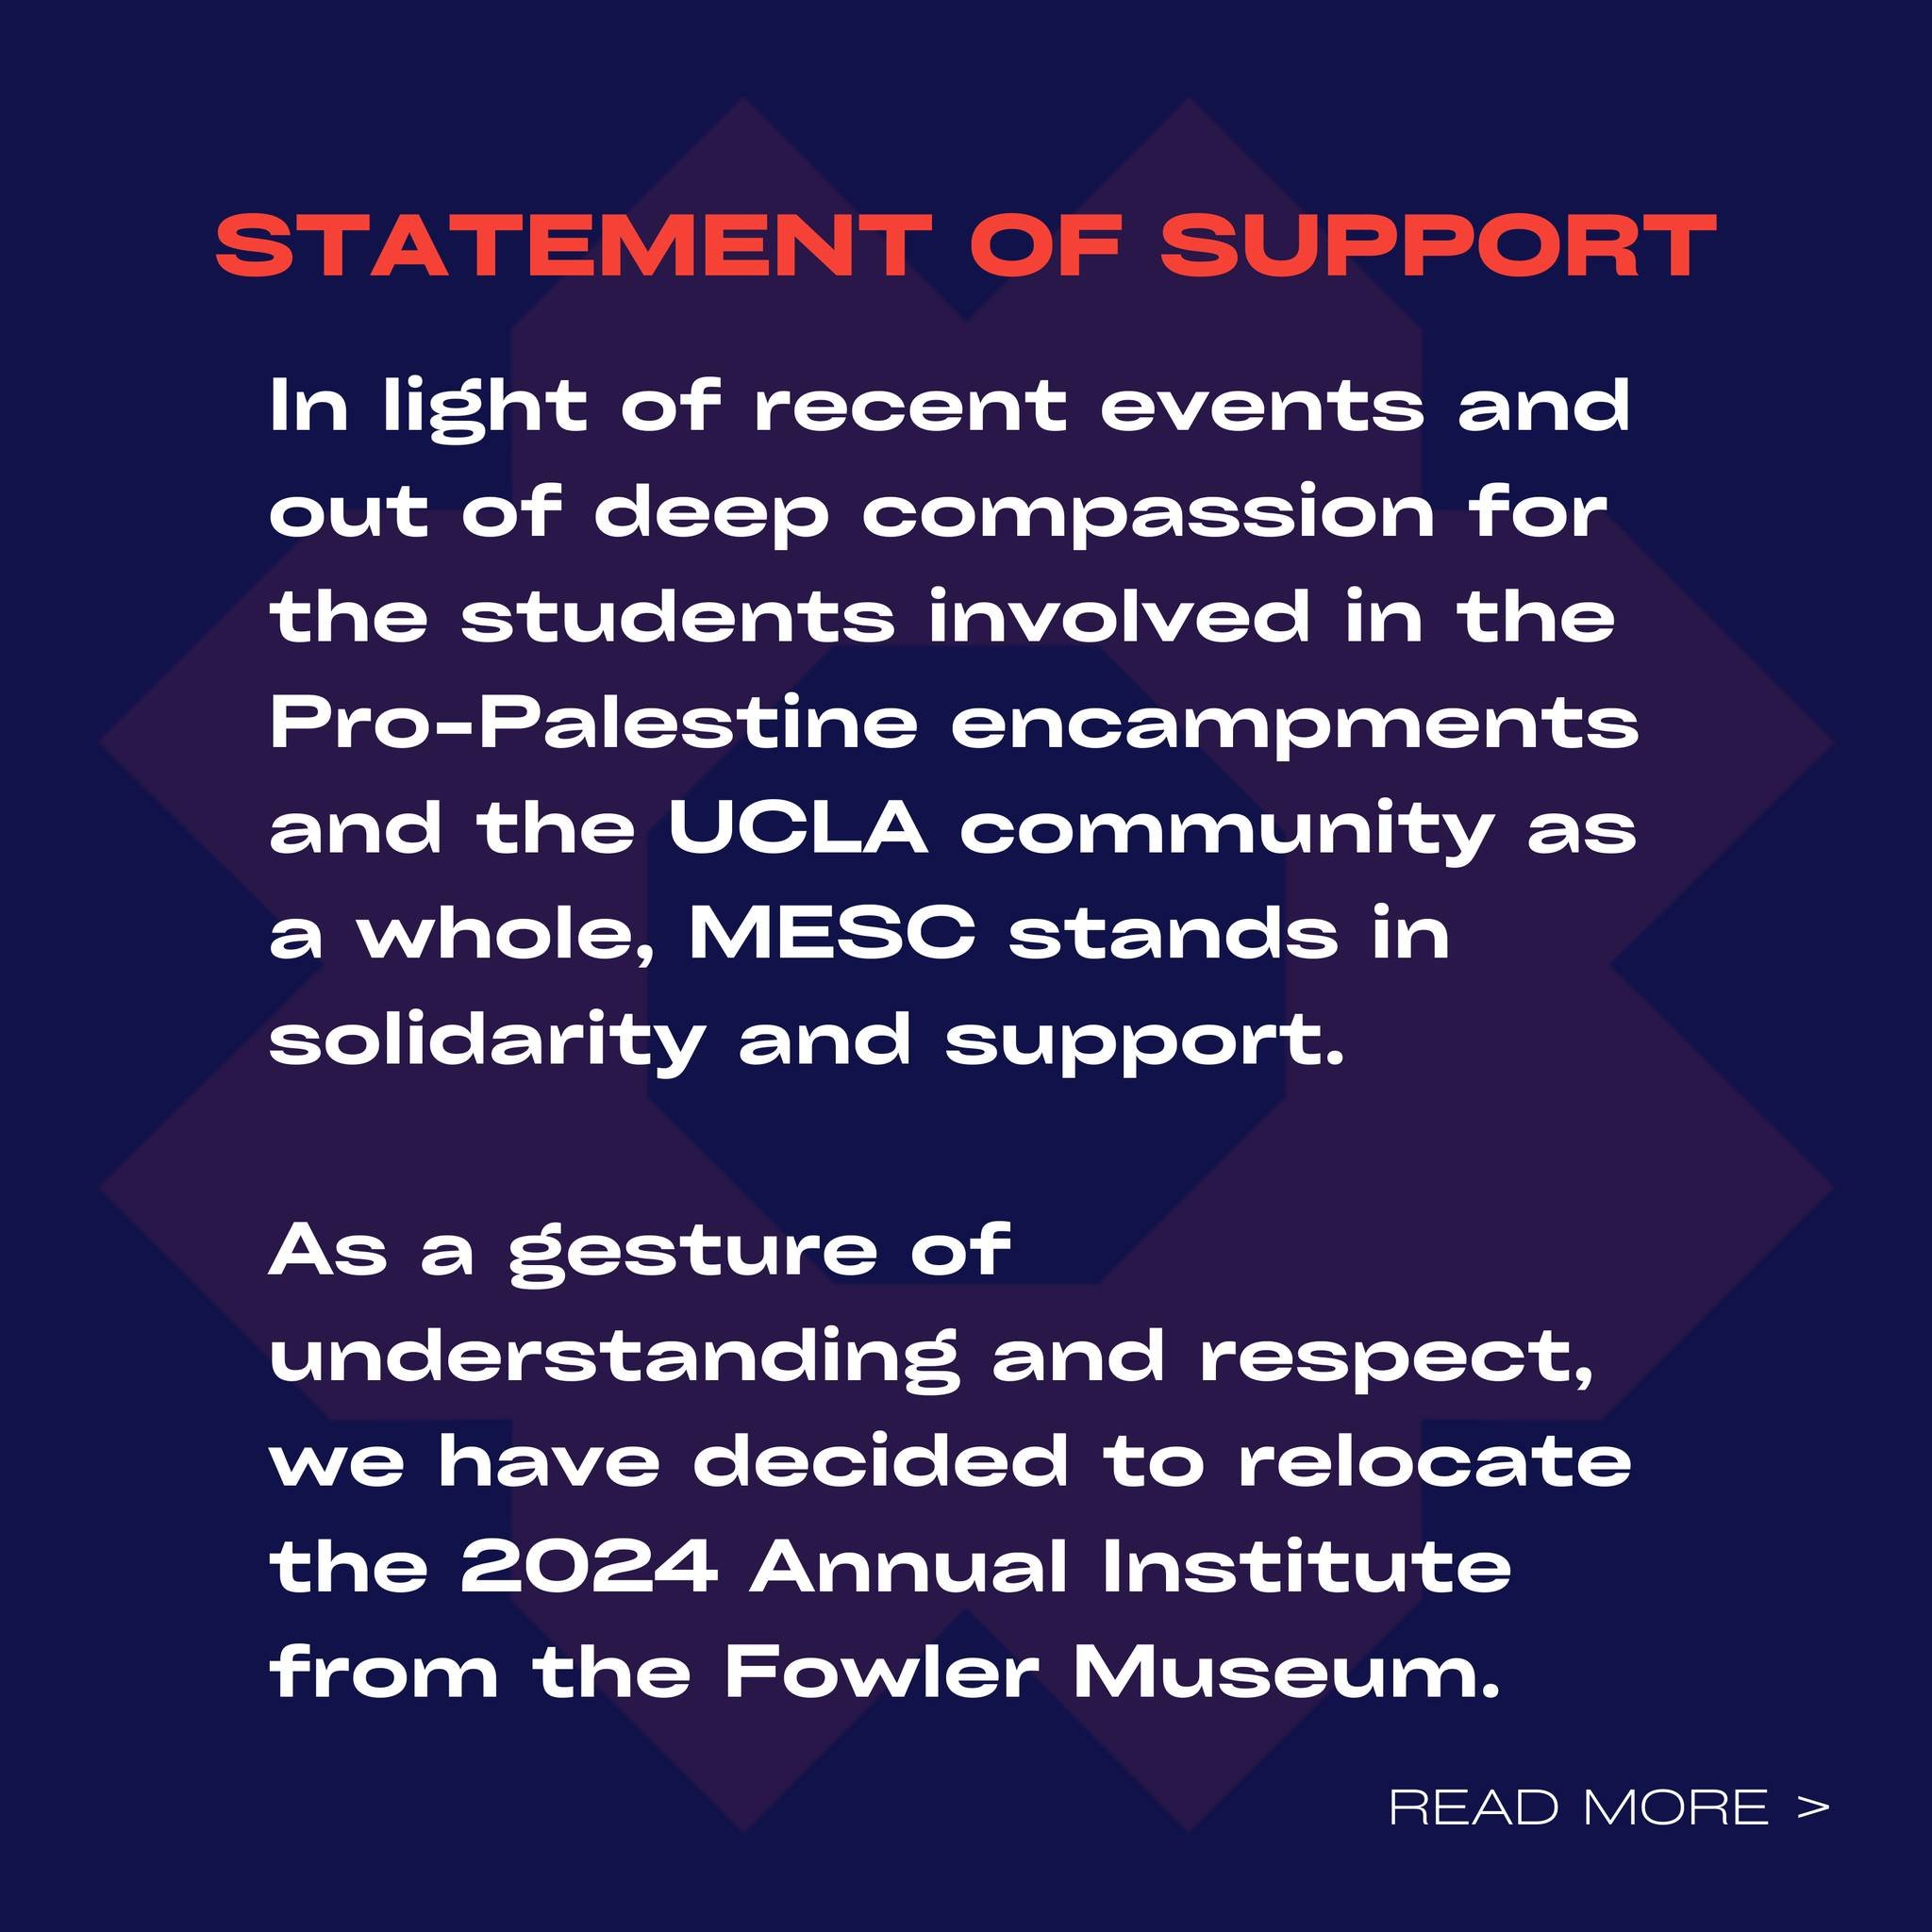 In light of recent events and out of deep compassion for the students and faculty involved in the Pro-Palestine encampments and the UCLA community as a whole, MESC stands in solidarity and support. As a gesture of understanding and respect, the MESC 